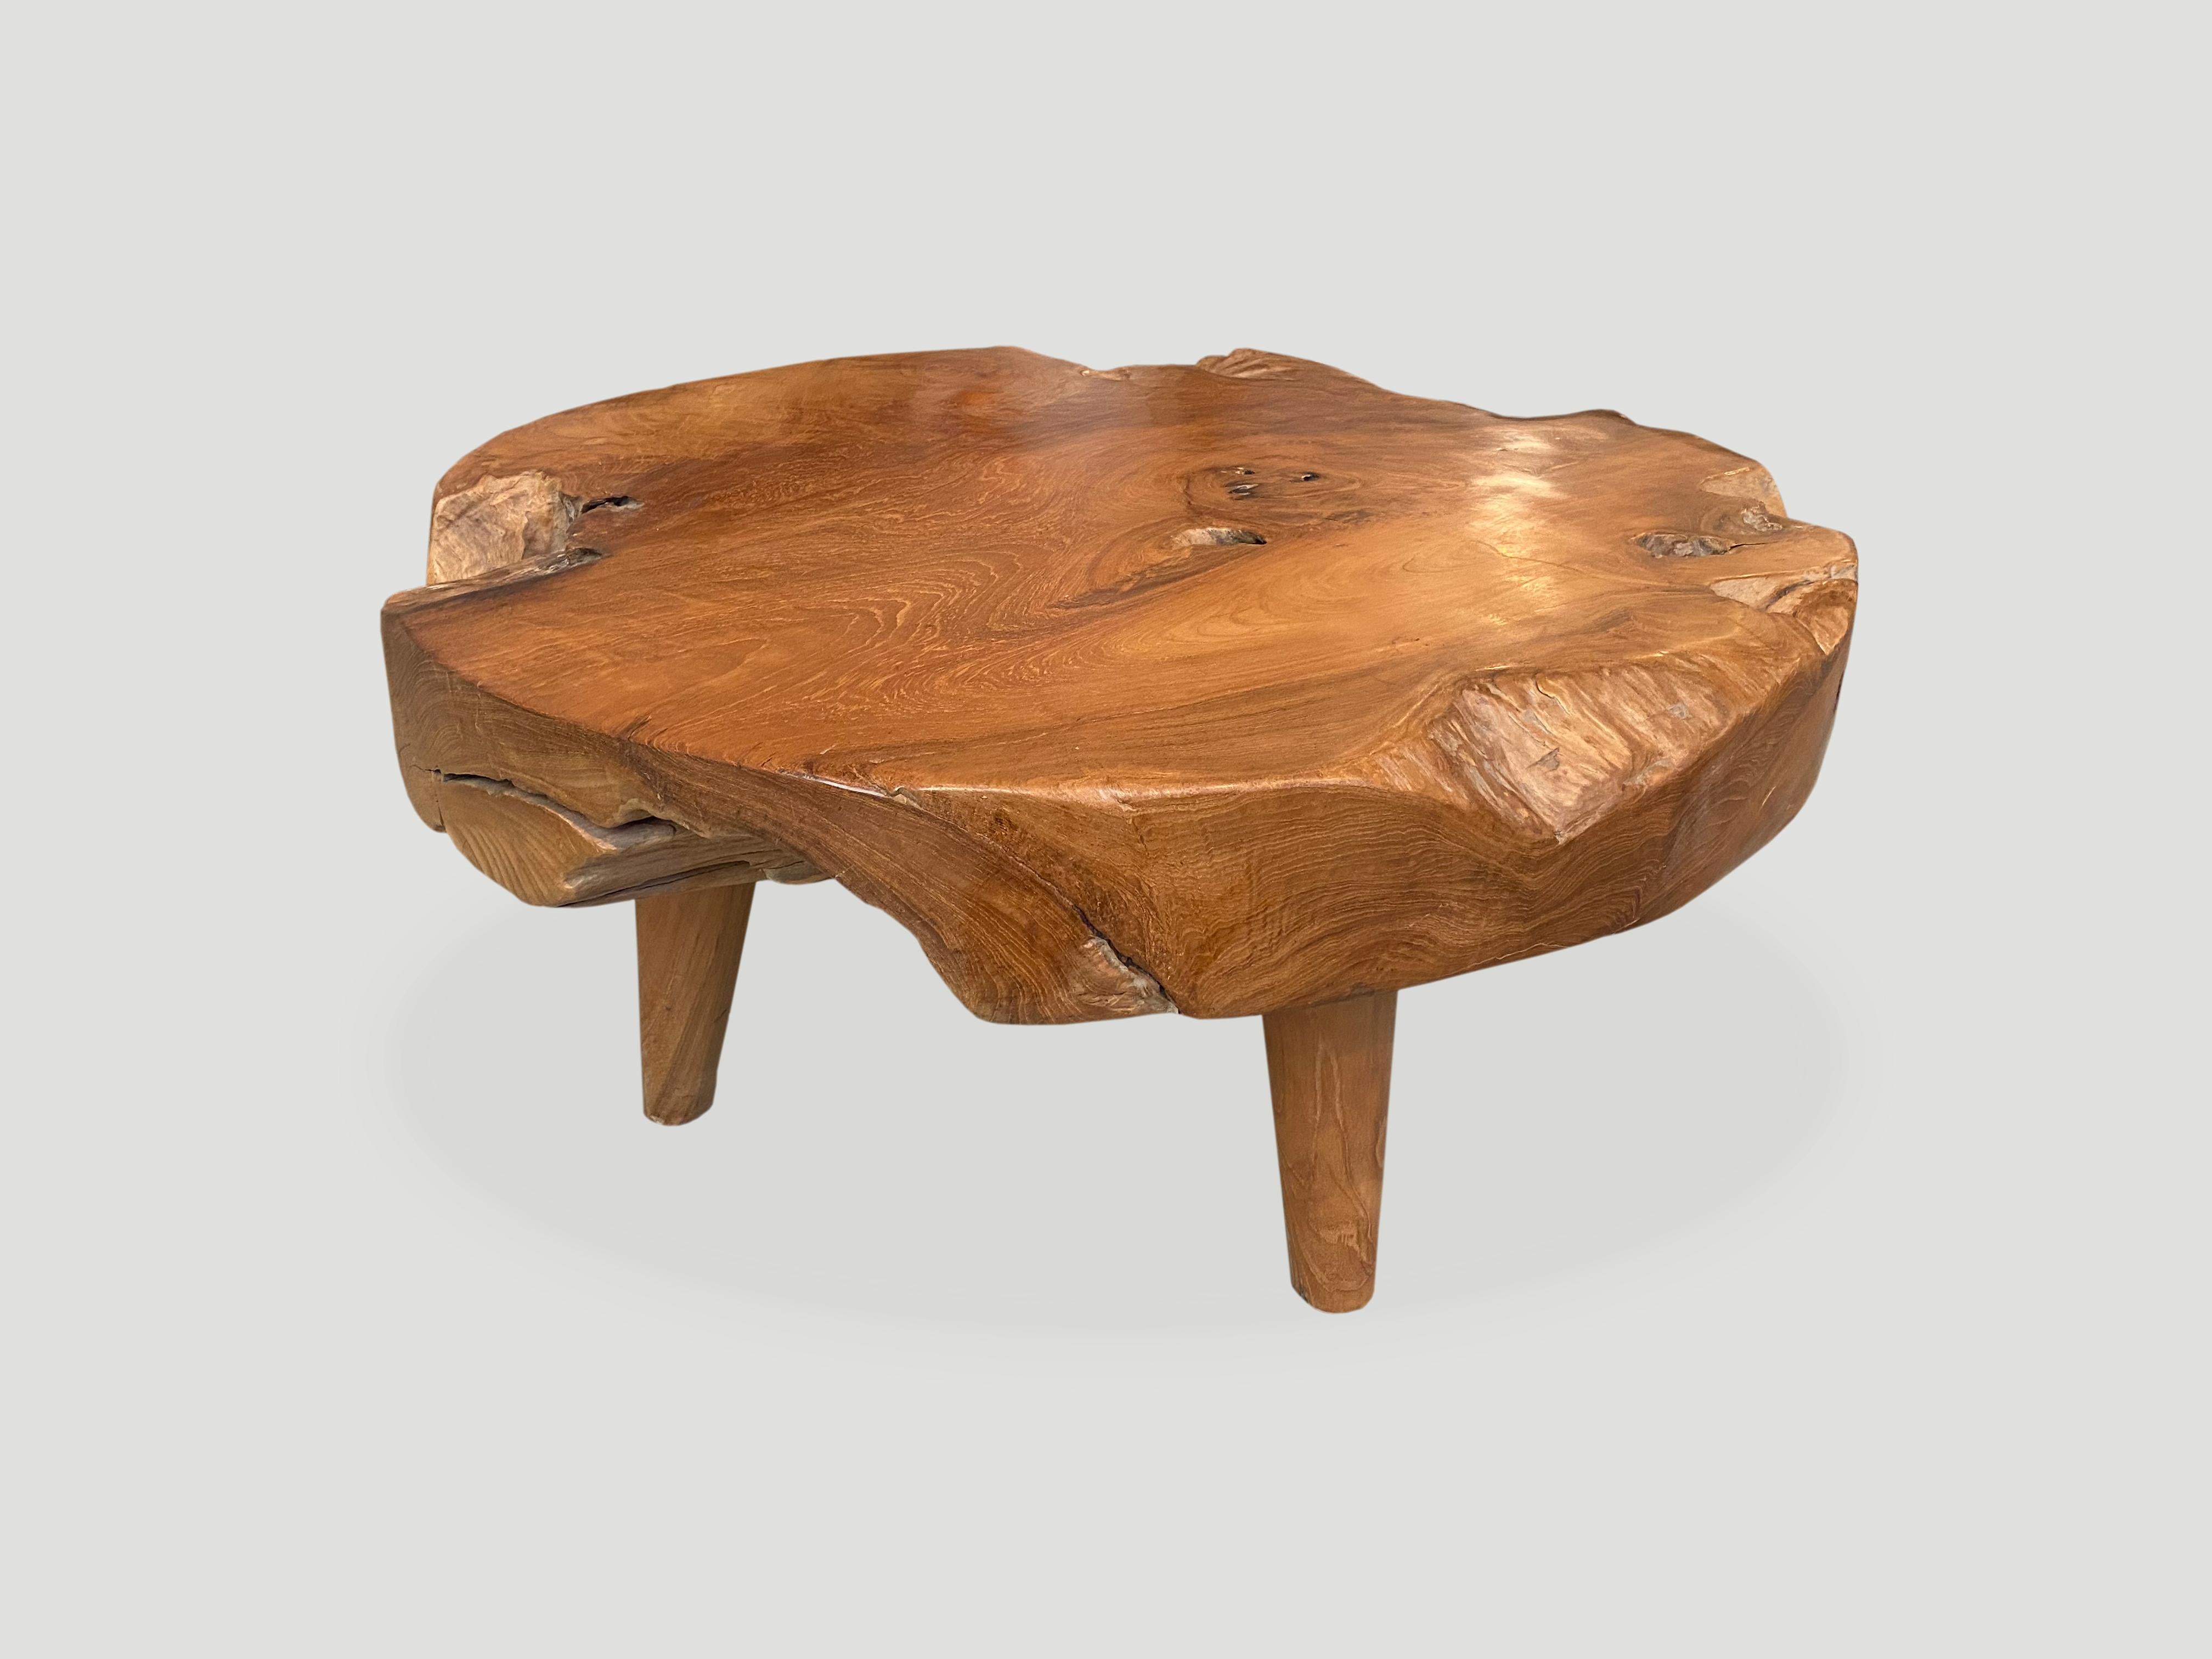 Impressive five inch thick natural teak wood coffee table carved from a single log. Floating on midcentury style cone shaped legs. Organic with a twist. We have a collection. The size and price reflect the one shown.

Own an Andrianna Shamaris